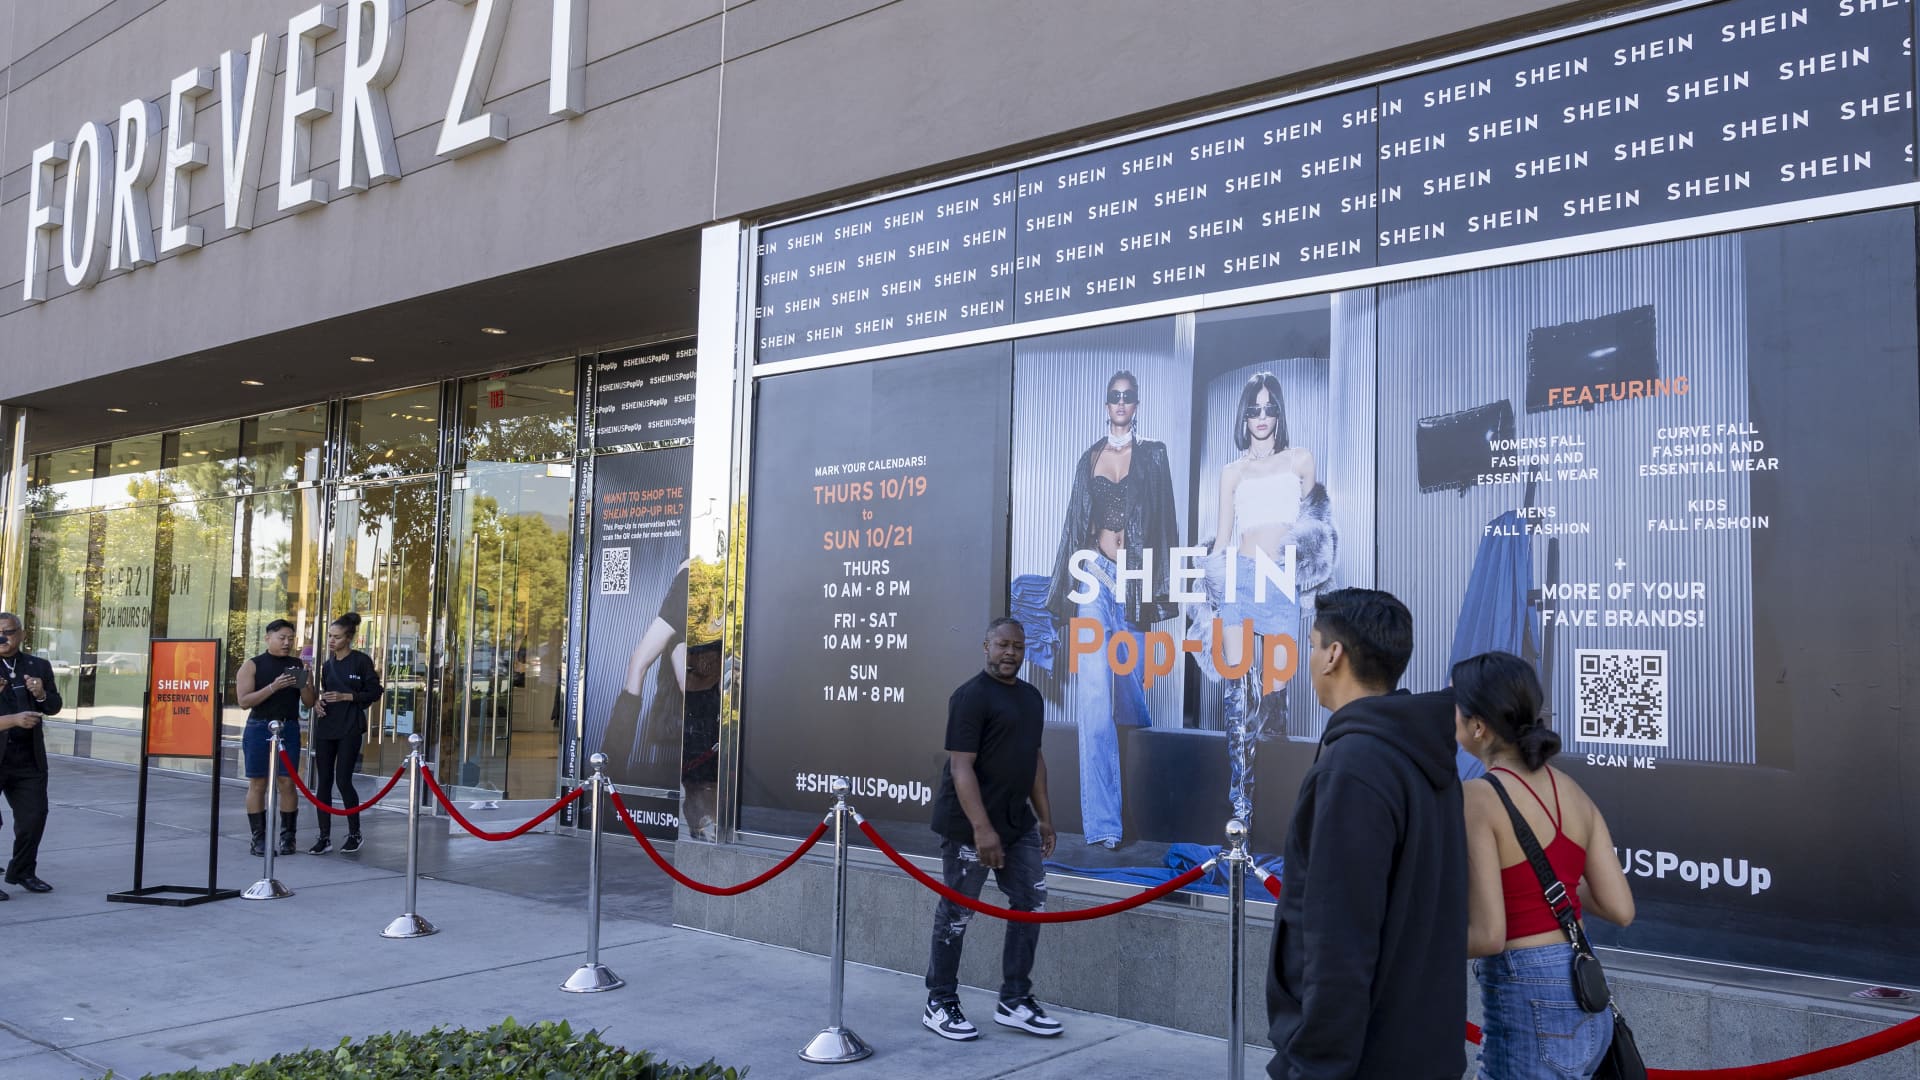 Shein’s revenue is ‘a lot more’ than $30 billion annually: exec